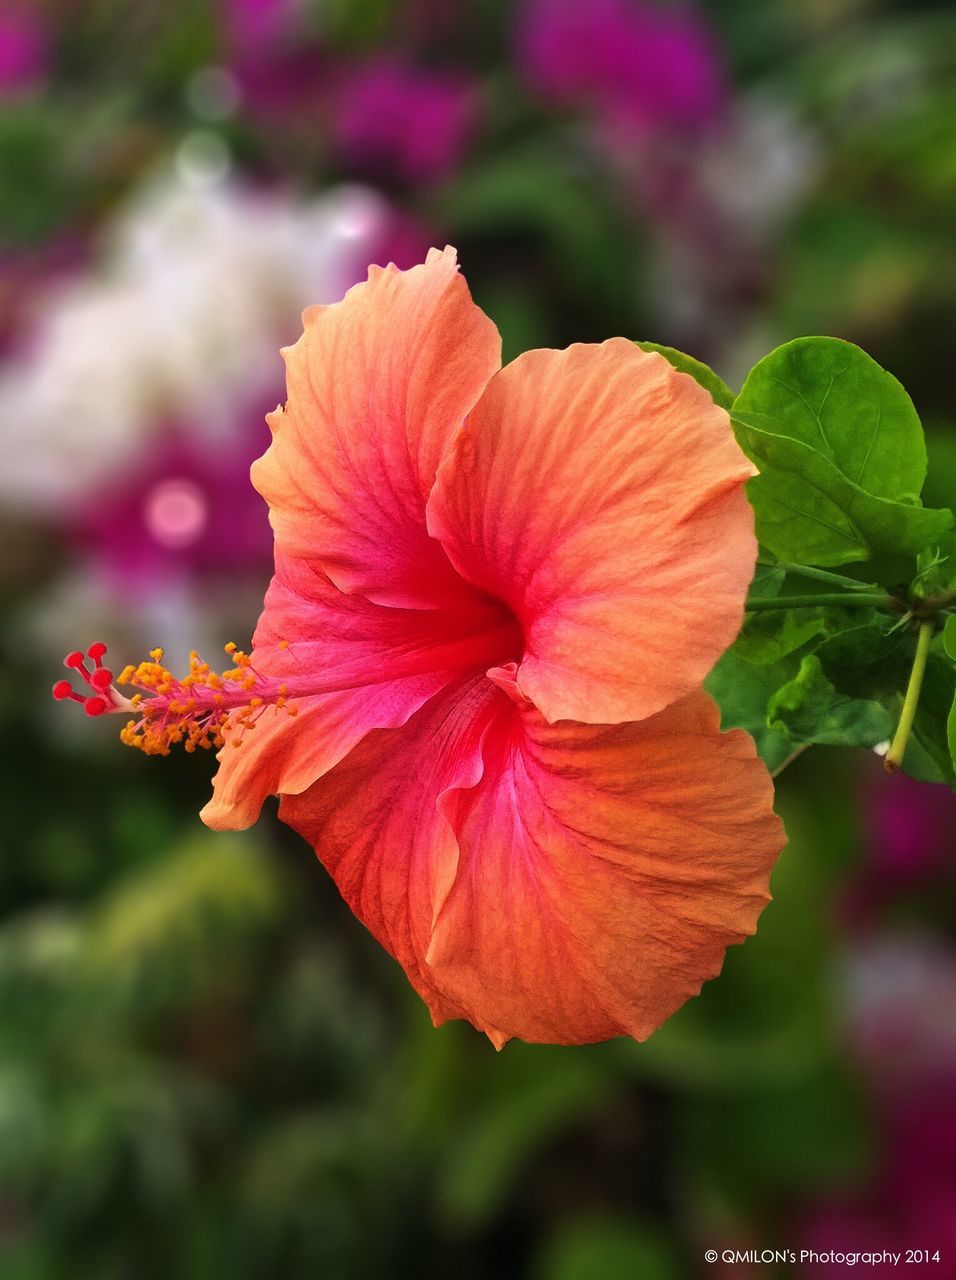 flower, petal, fragility, freshness, focus on foreground, growth, close-up, beauty in nature, flower head, nature, leaf, orange color, blooming, plant, red, season, stamen, park - man made space, day, selective focus